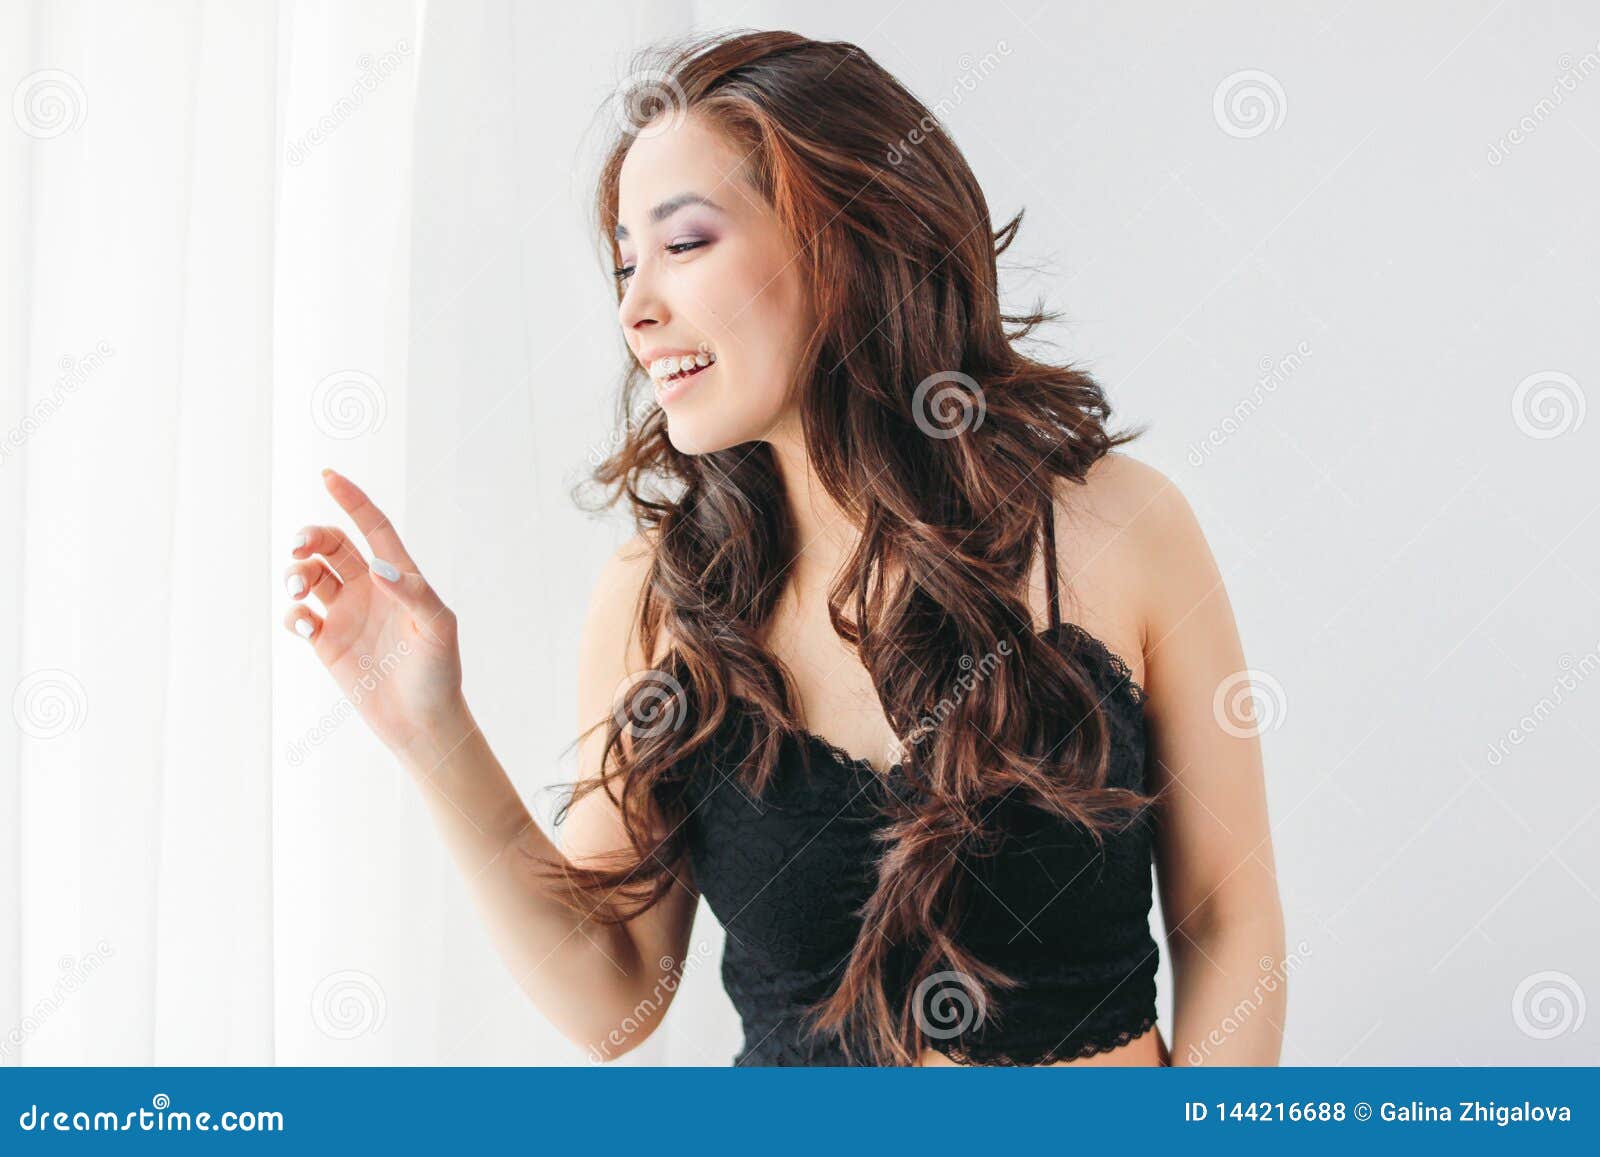 Happy Sensual Smiling Girl Asian Young Woman with Dark Long Curly Hair ...